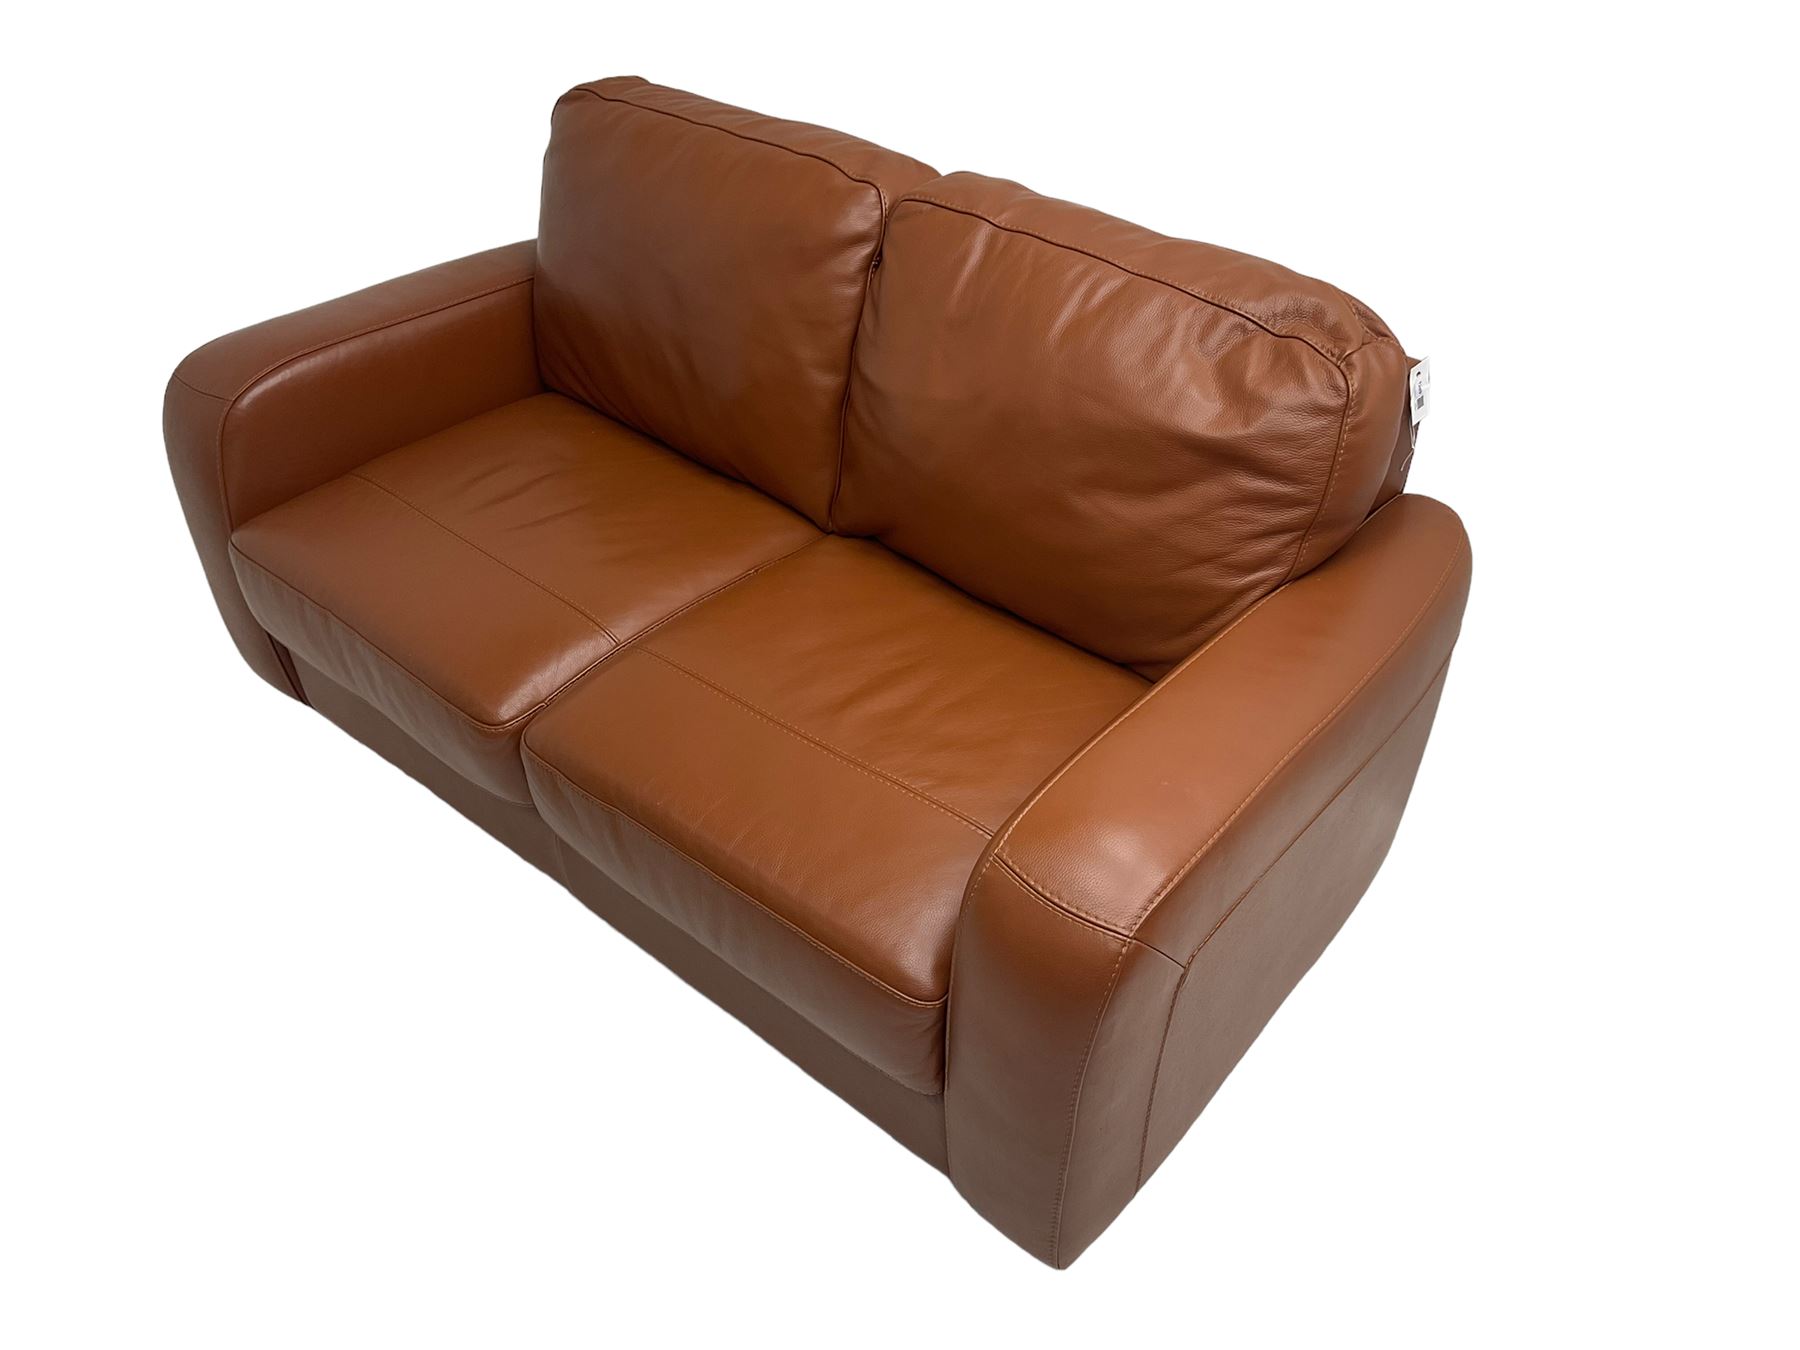 Two seat sofa - Image 3 of 6